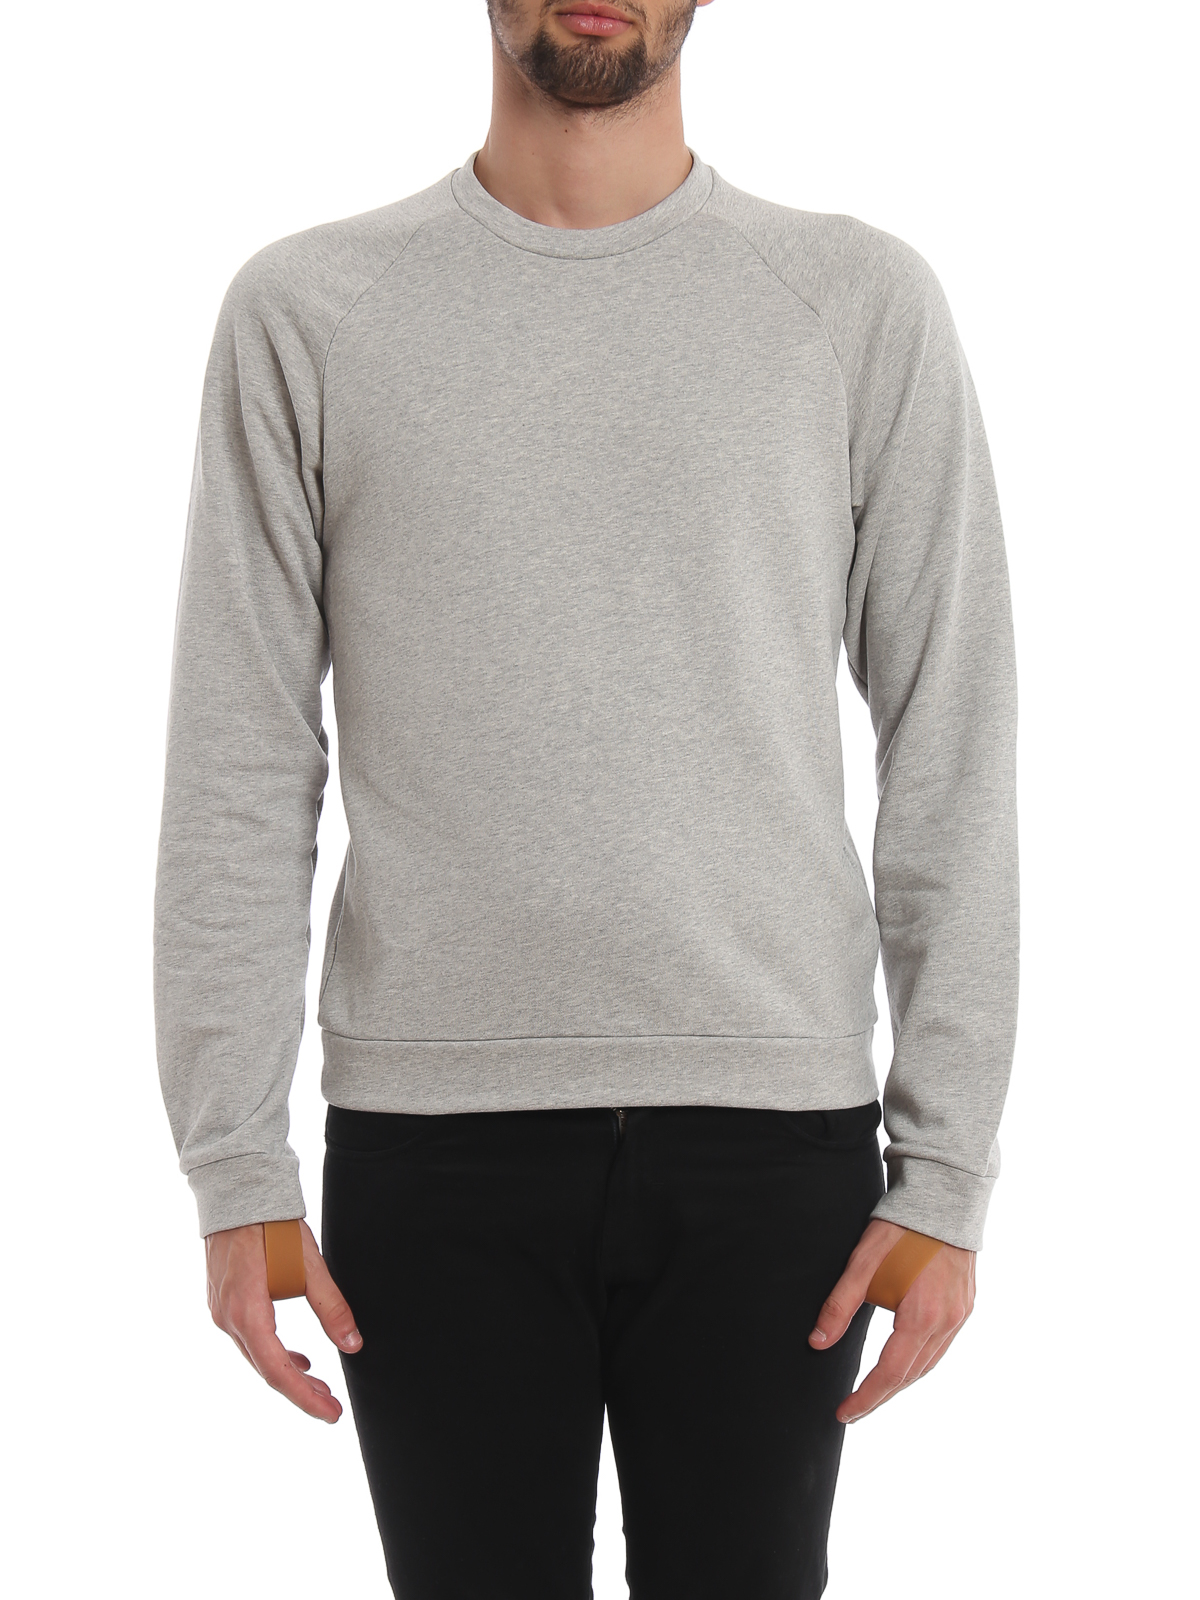 & Sweaters Lang - Sweatshirt with rubber cuff straps J04HM520B05LIGHT